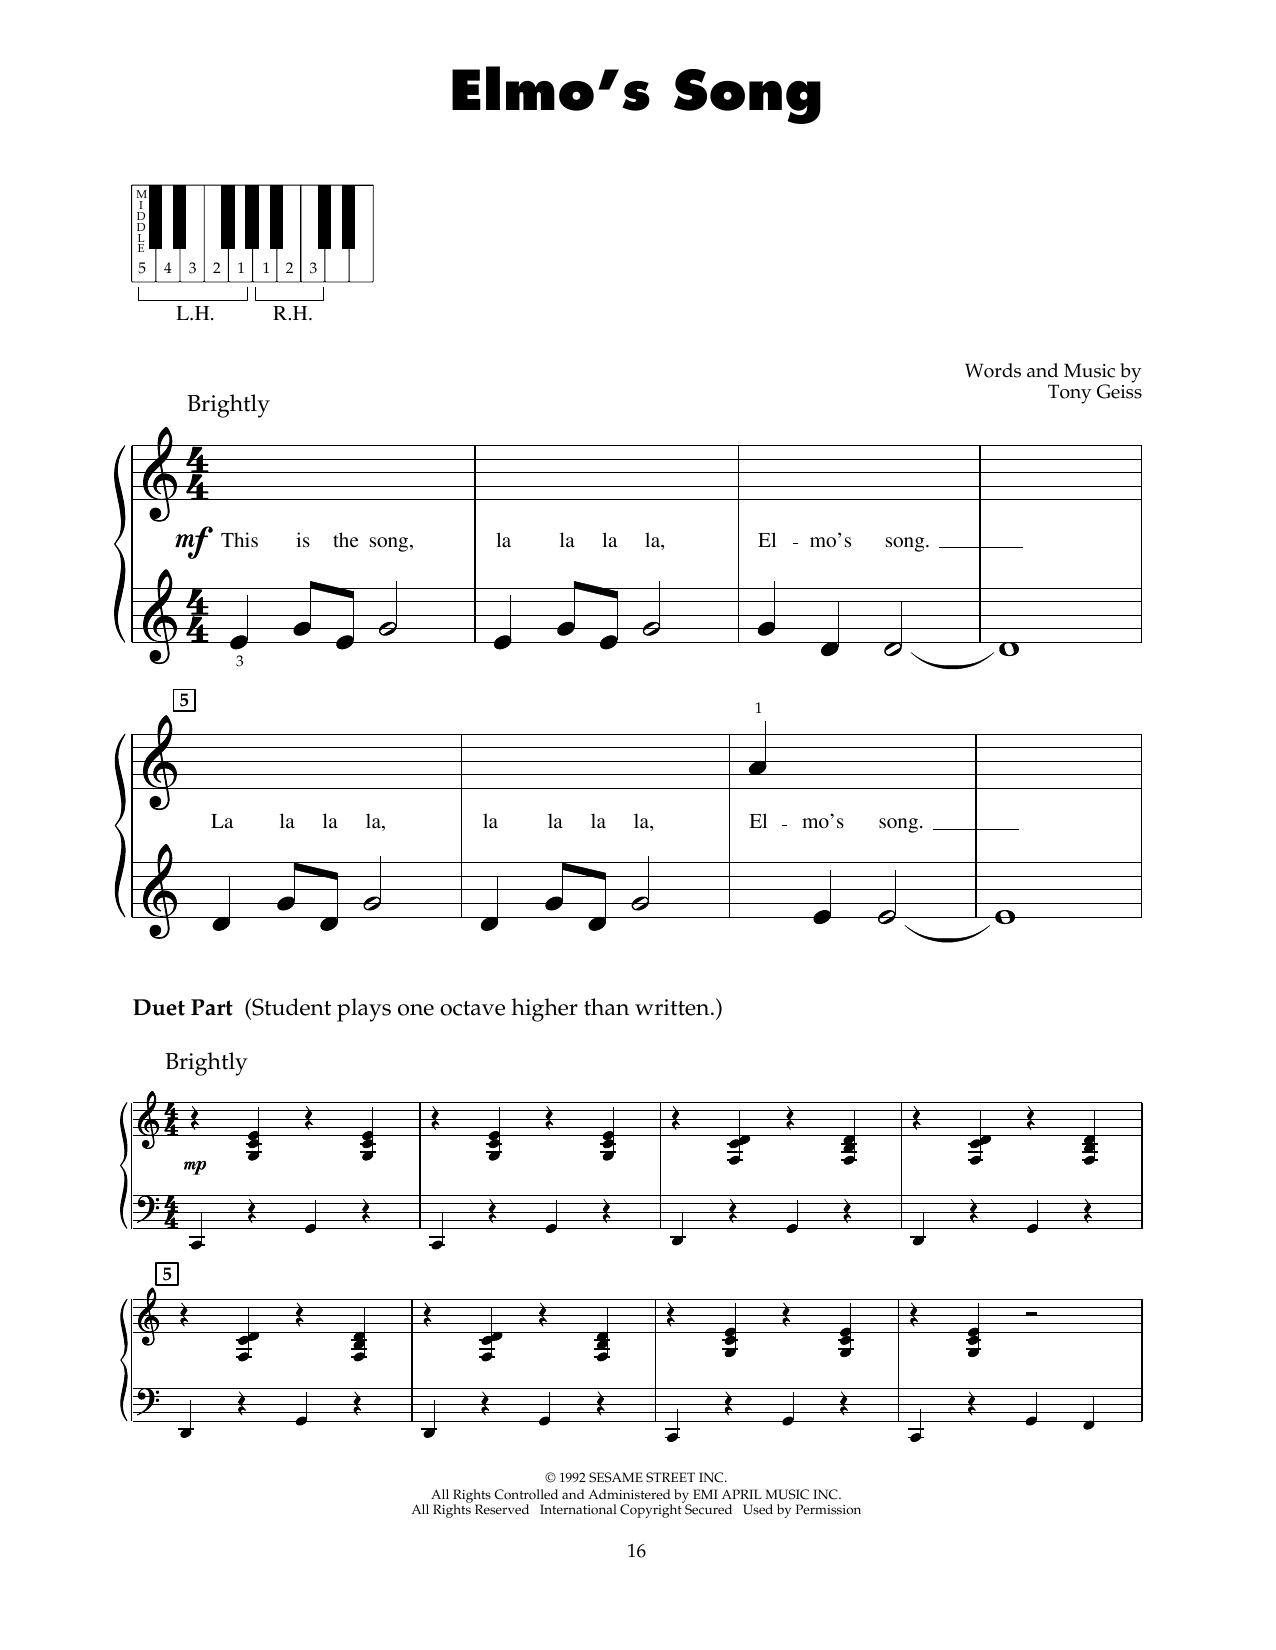 Download Tony Geiss Elmo's Song Sheet Music